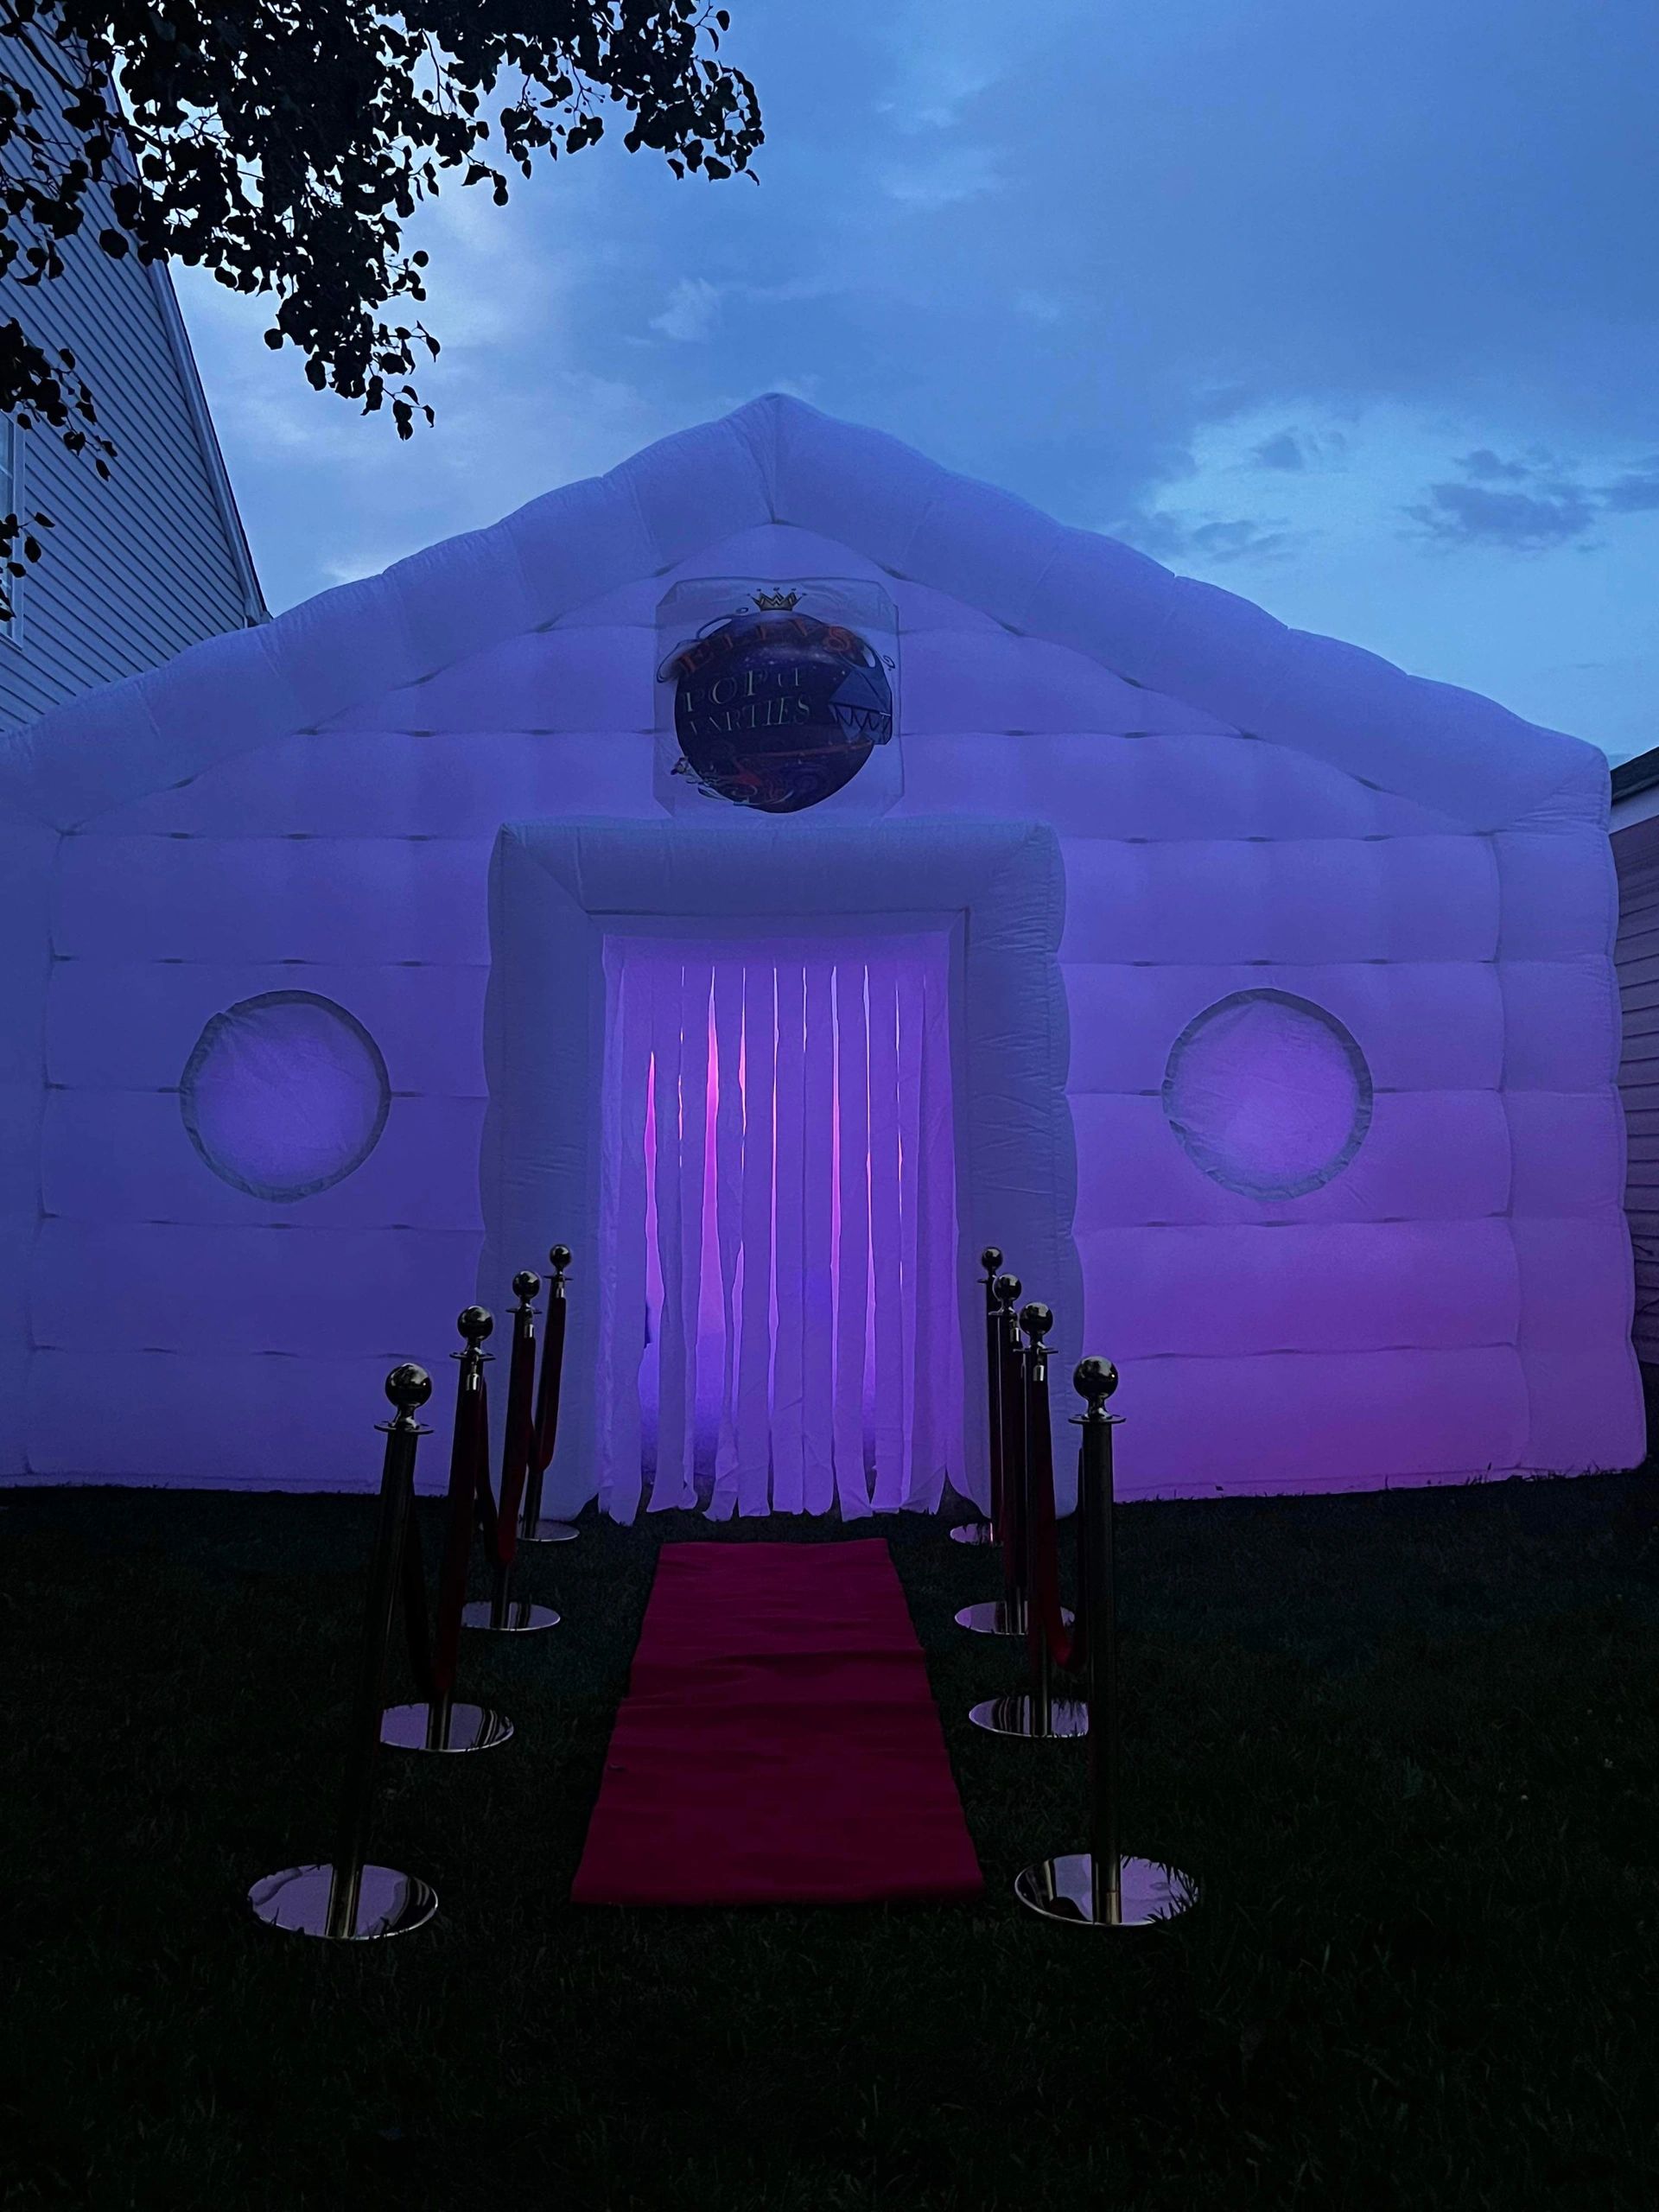 Inflatable party tent